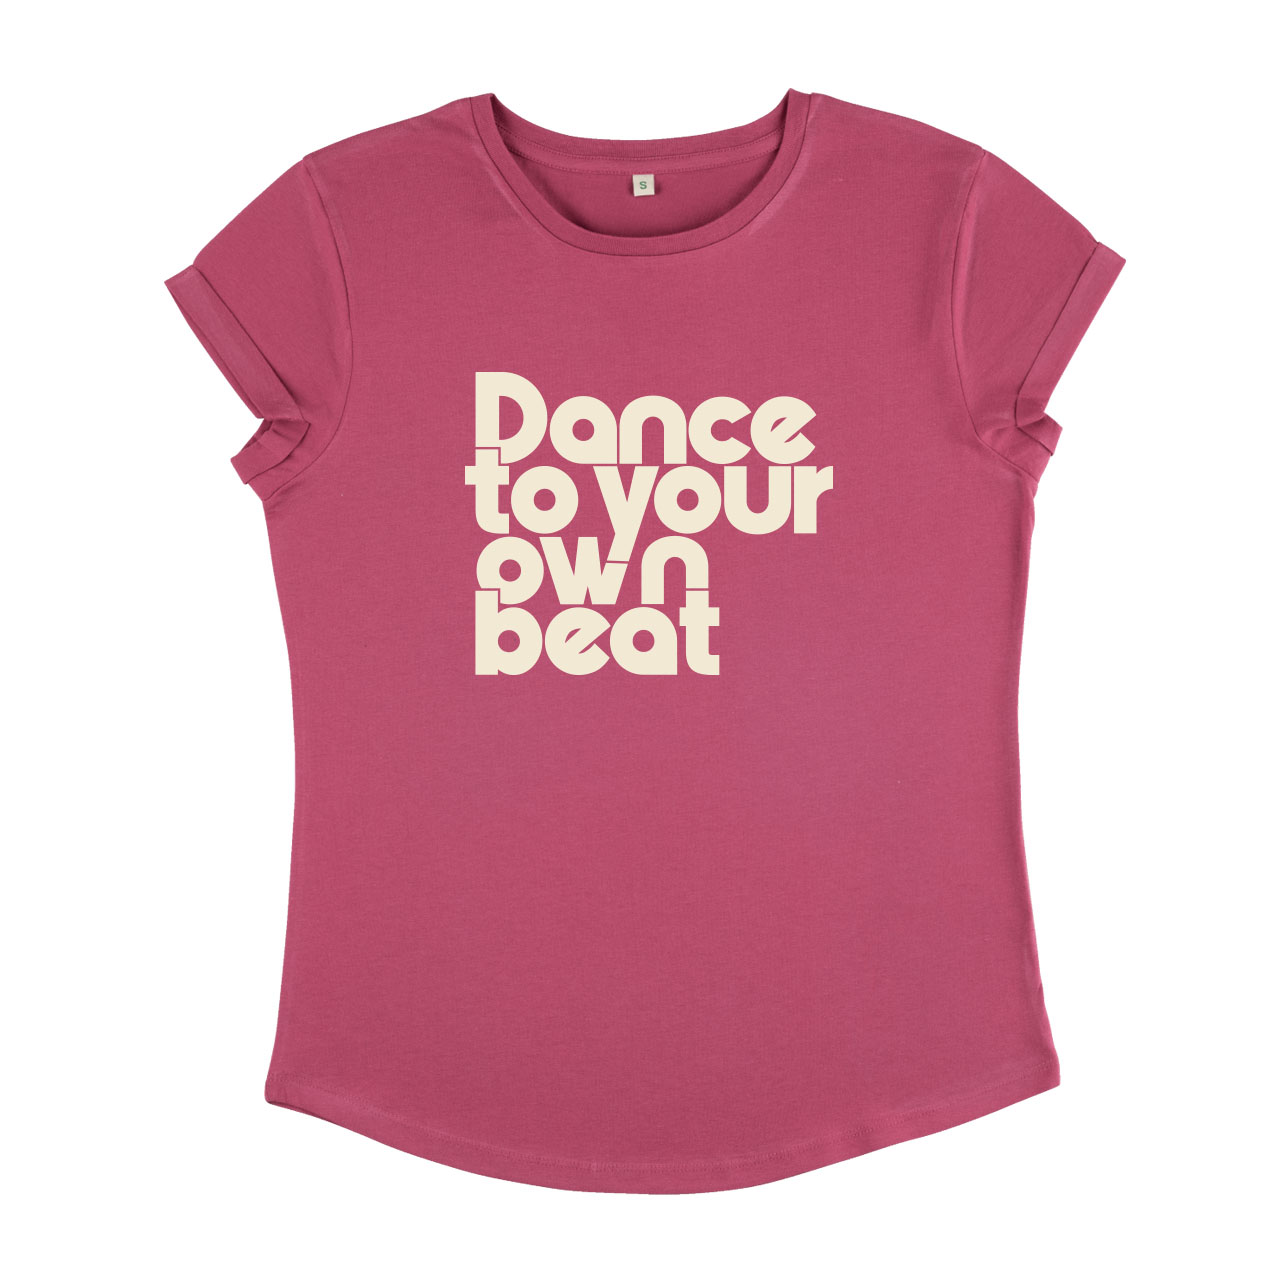 Dance To Your Own Beat Tee - Berry